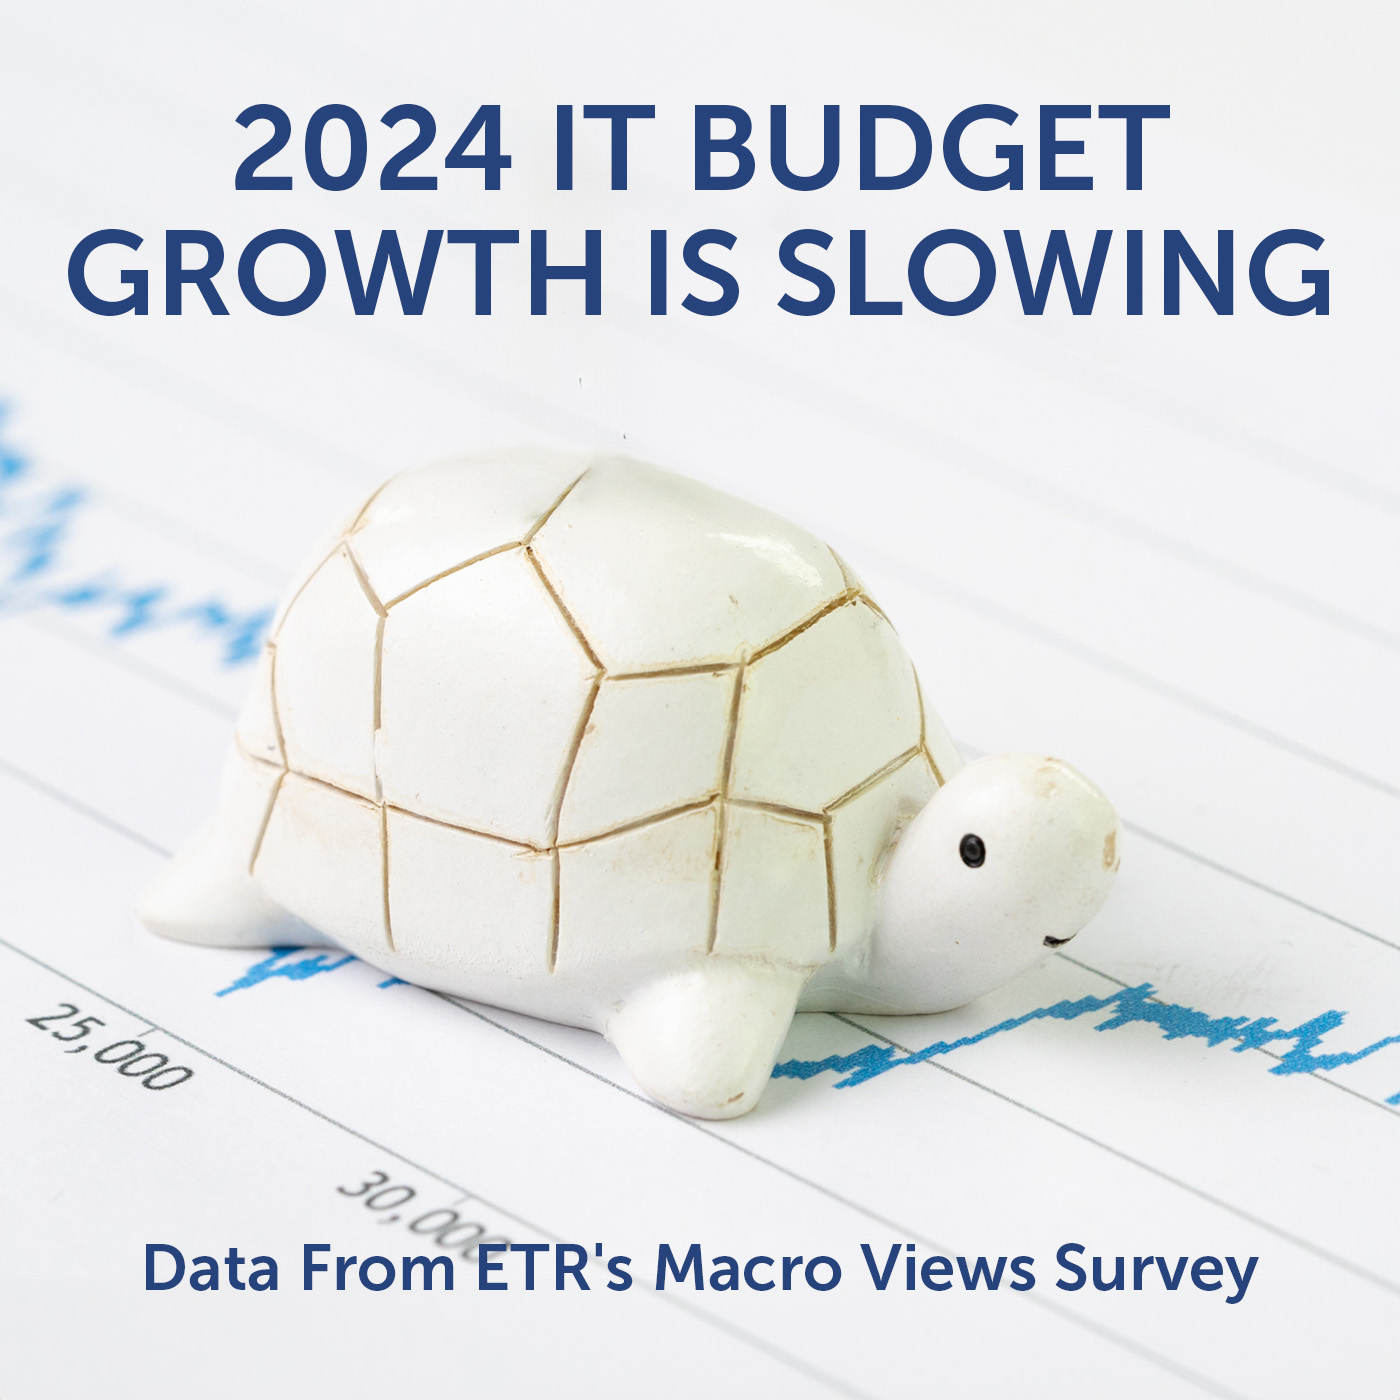 Headline art featuring a turtle: 2024 IT Budget Growth is Slowing